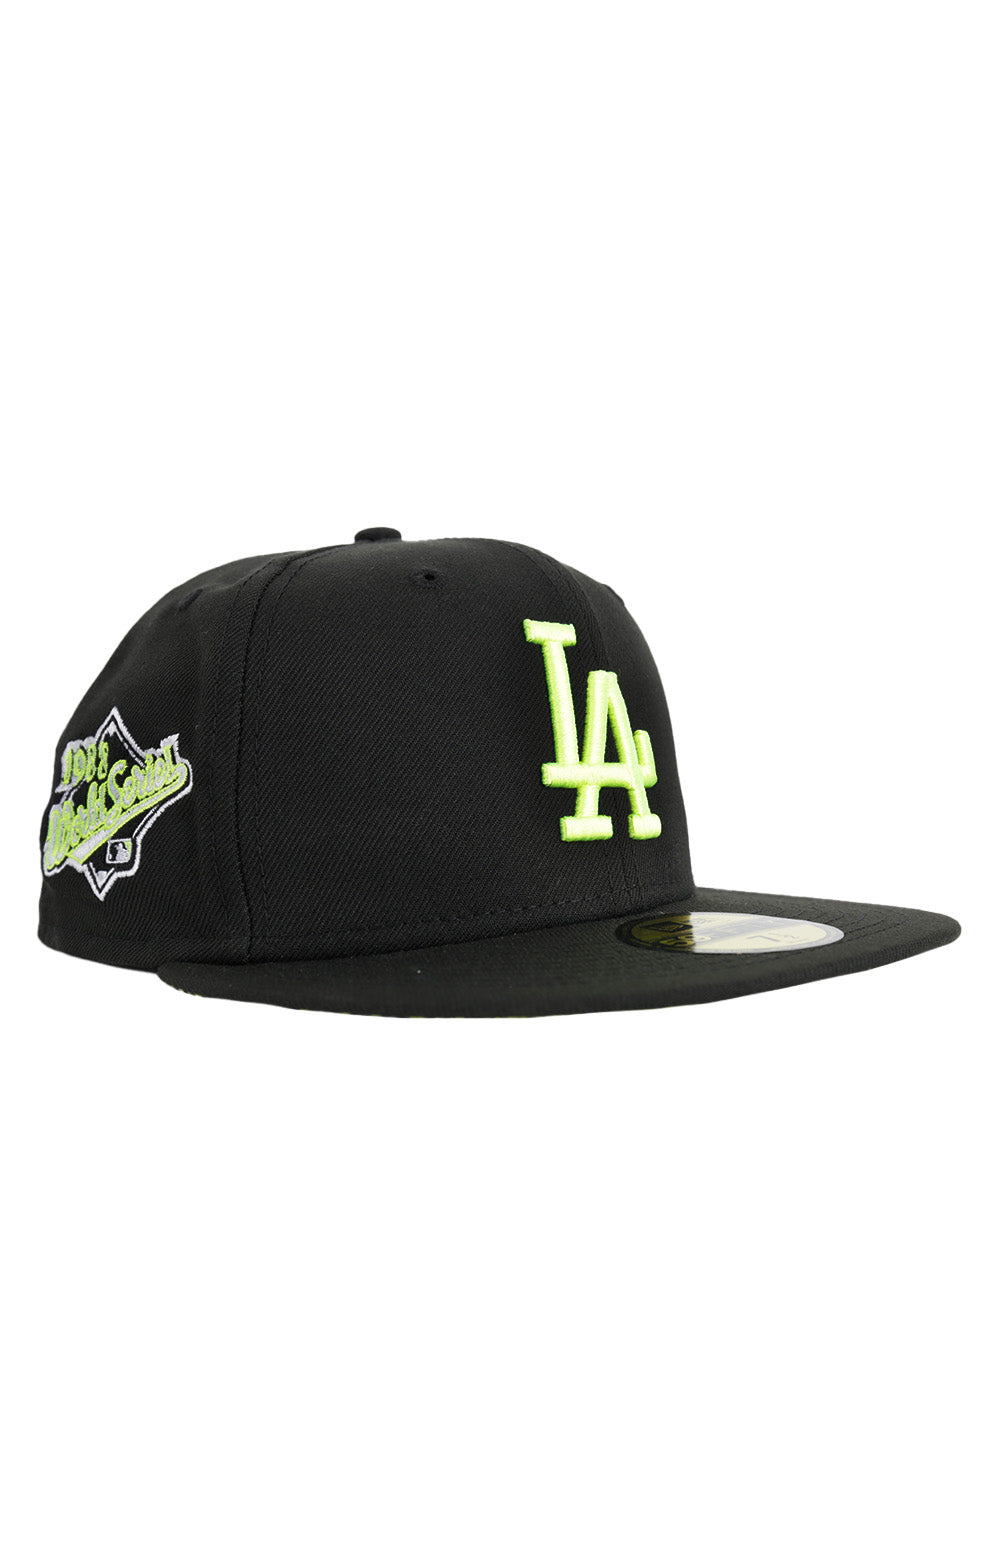 LA Dodgers Summer Pop 59FIFTY Fitted Hat